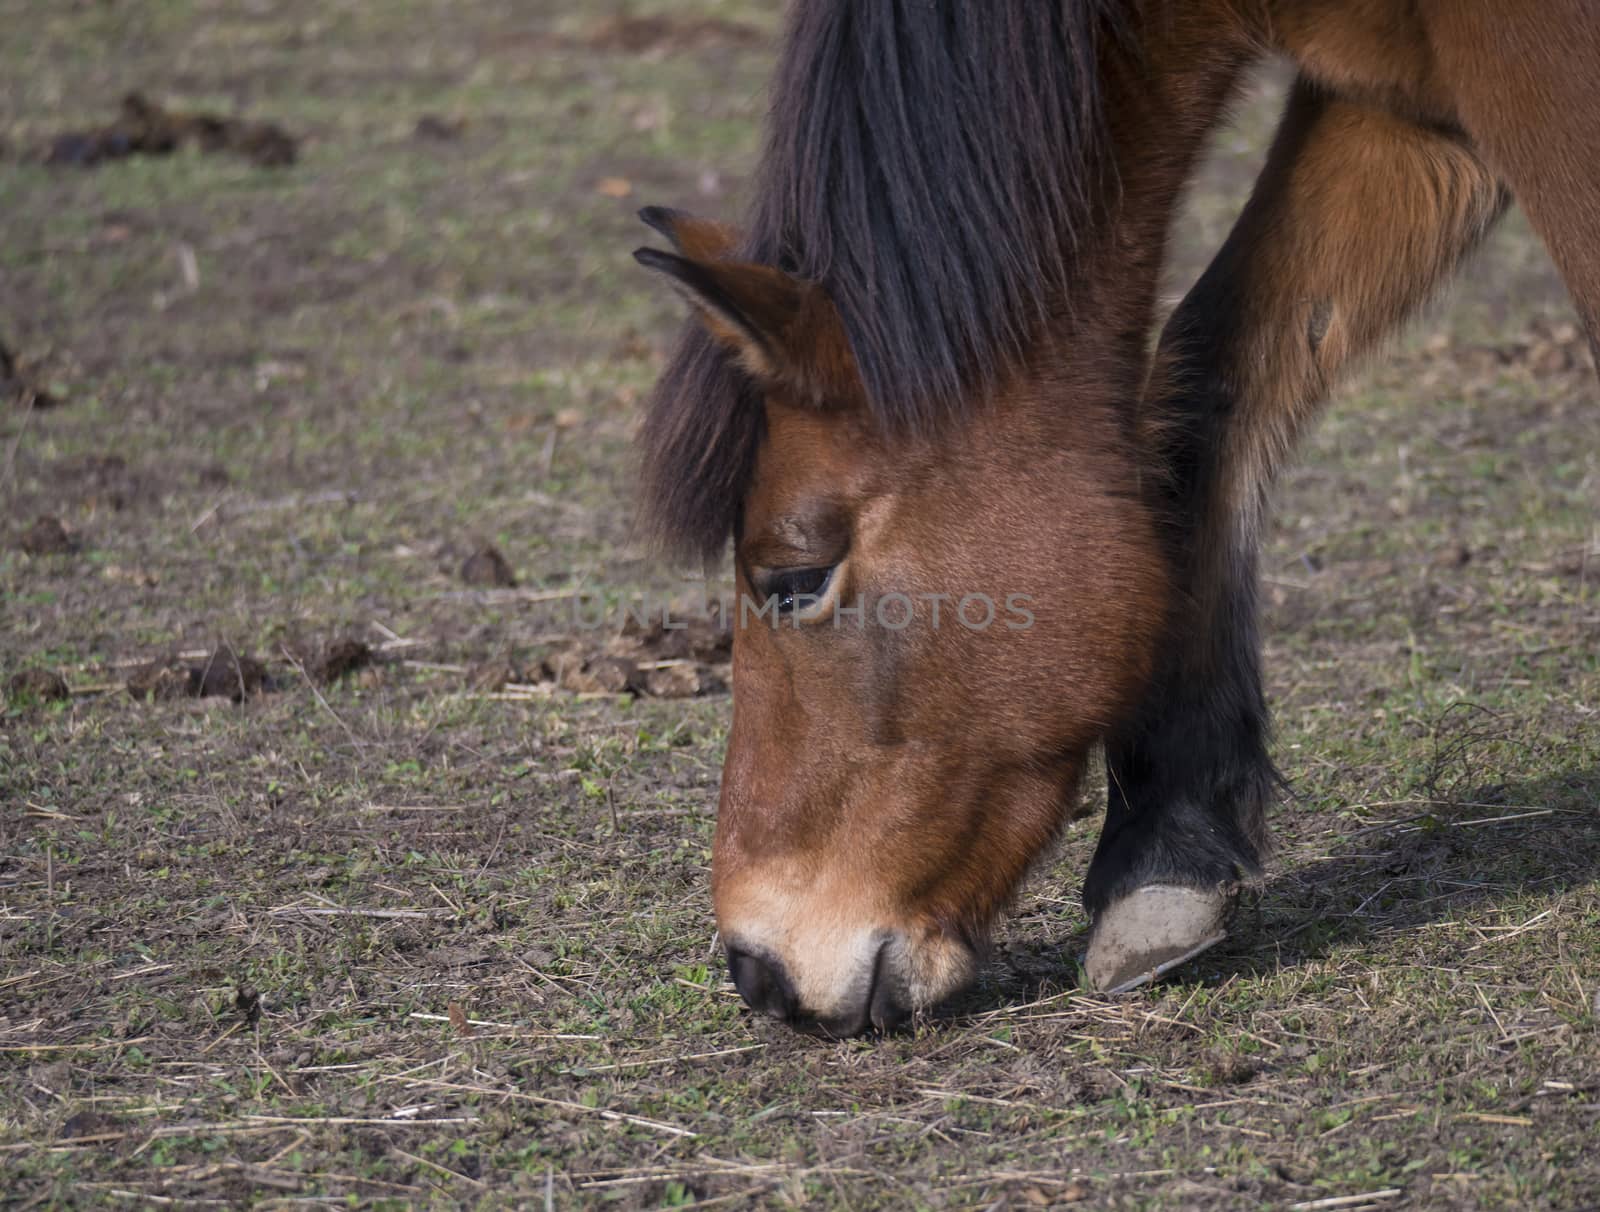 close up head of ginger brown horse grazing eating grass on dirt meadow in late autumn in Prague park, focus on eye